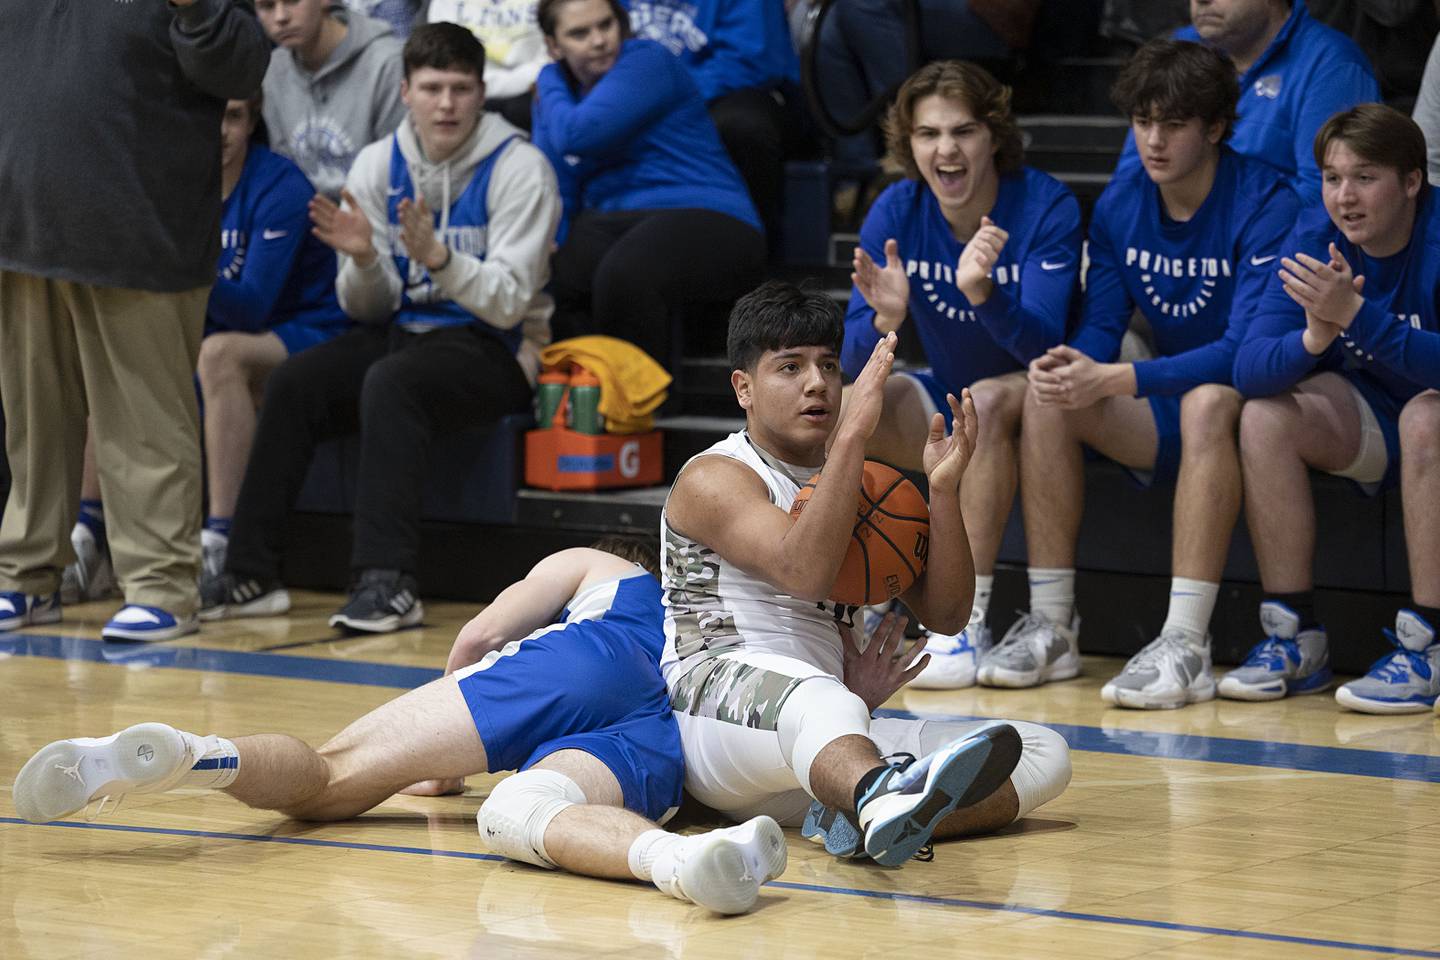 Newman’s Gabe Padilla calls for time after scrambling for a loose ball against PrincetonFriday, Jan. 13, 2023.